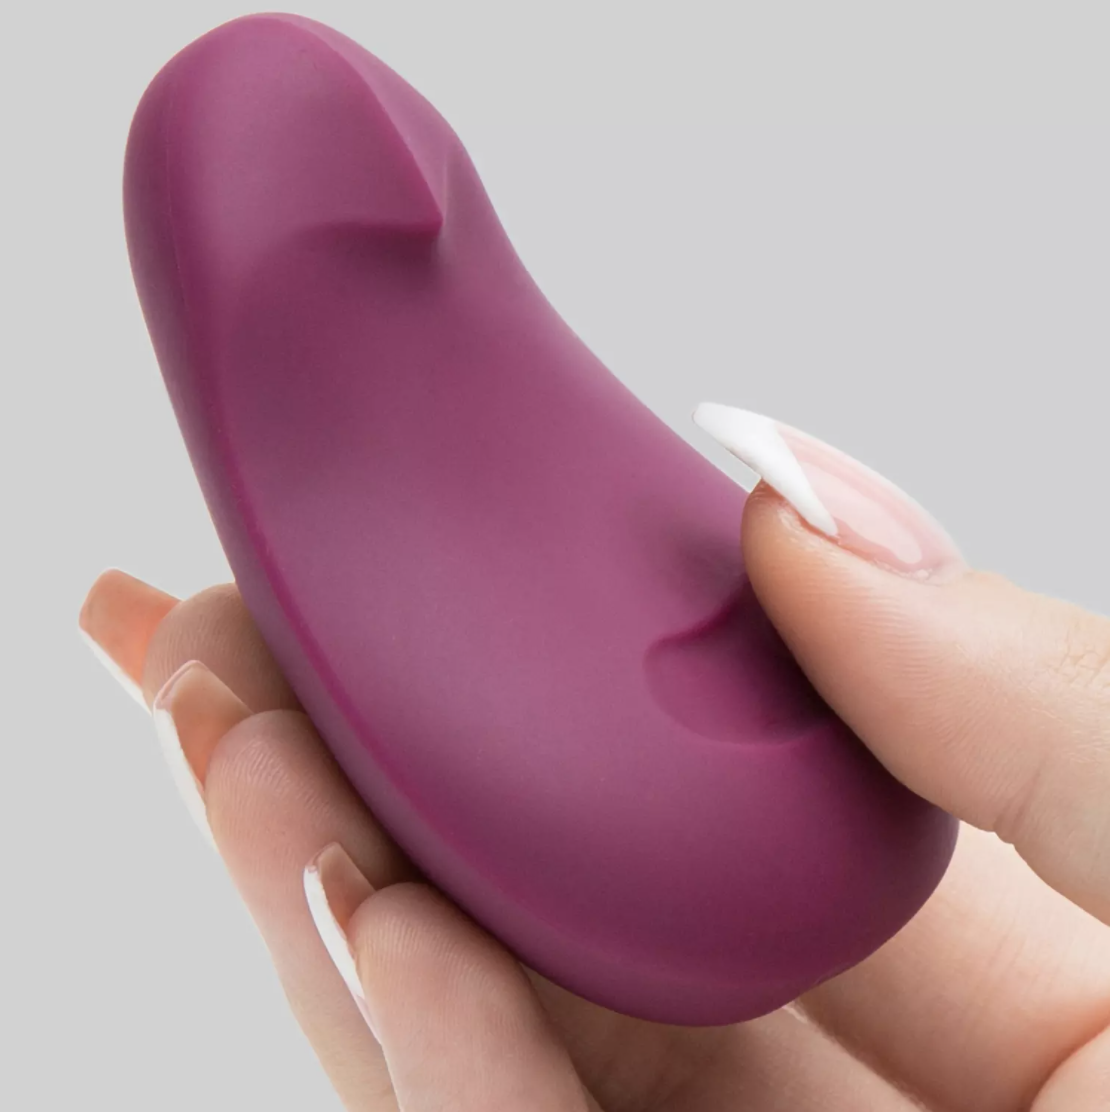 How to Buy Your Girlfriend a Sex Toy Shell Actually Love